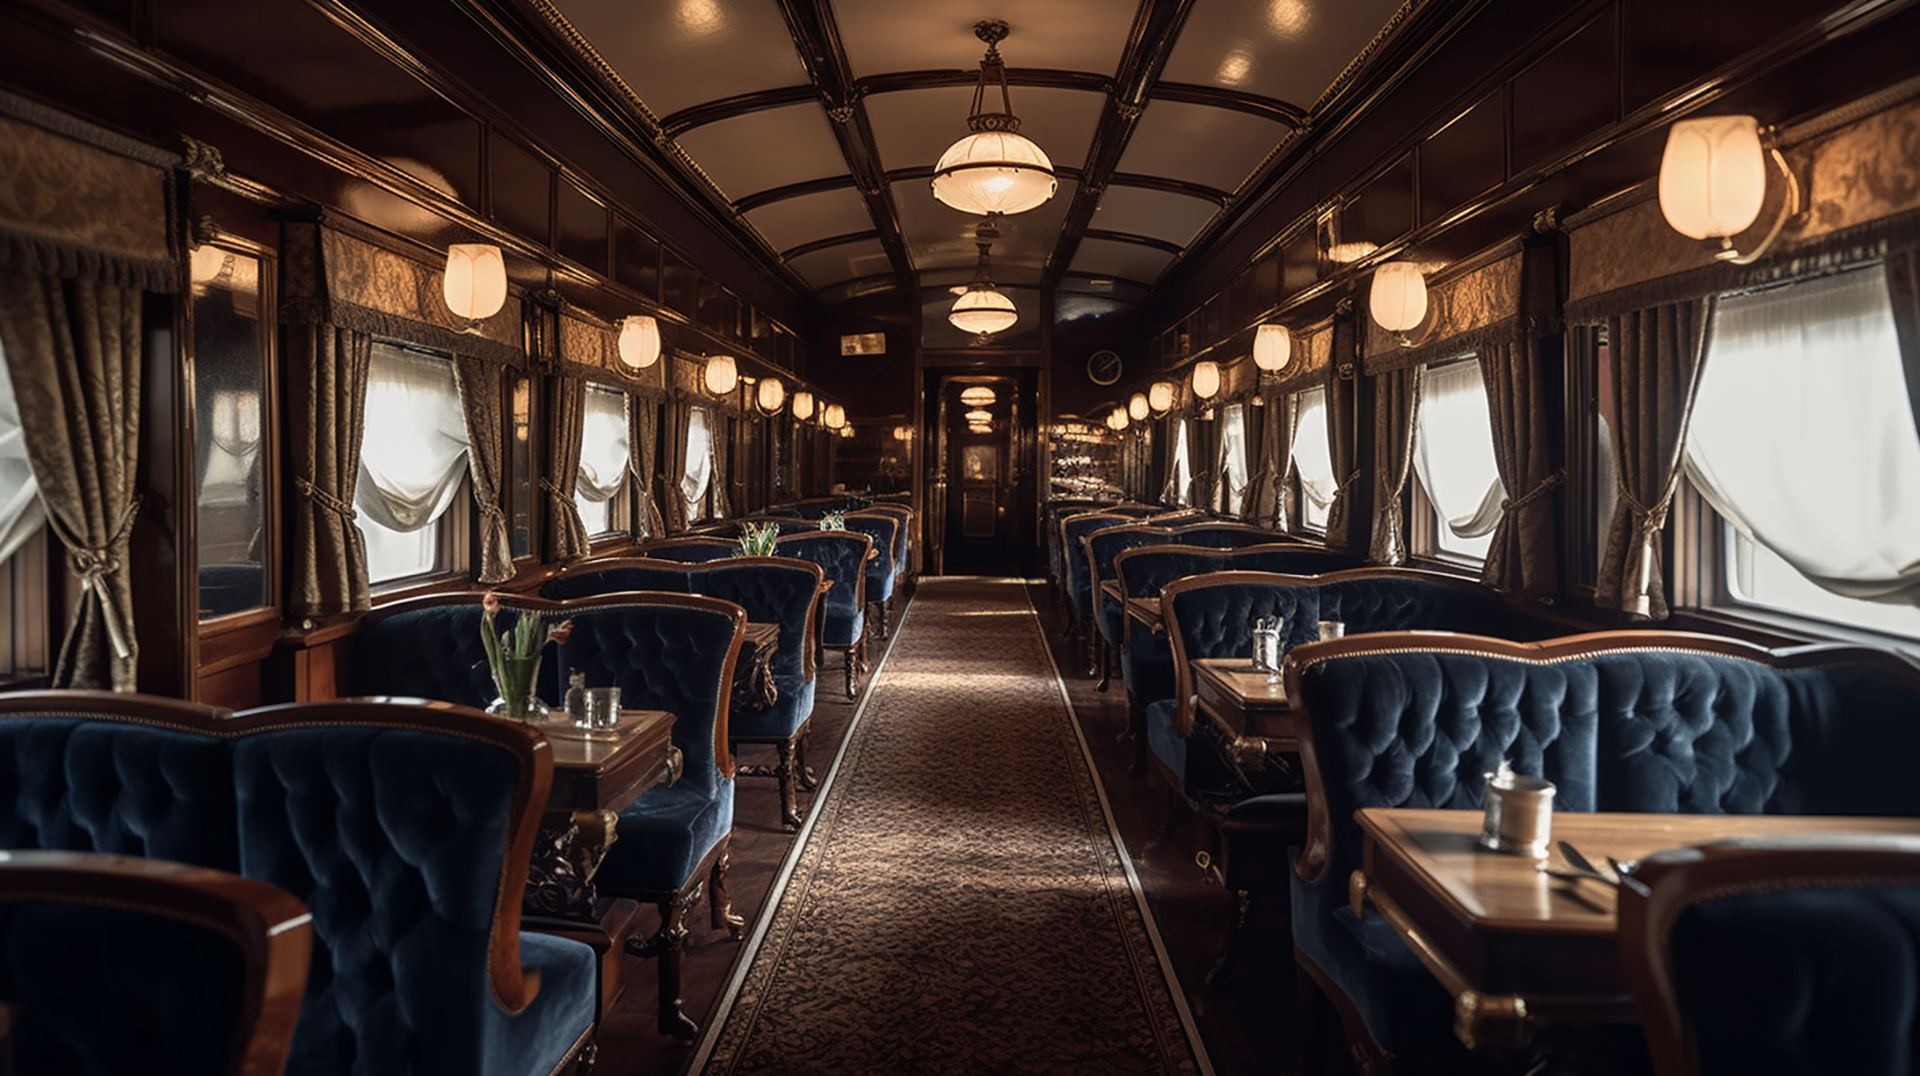 Orient Express: The historic Orient Express train is returning to